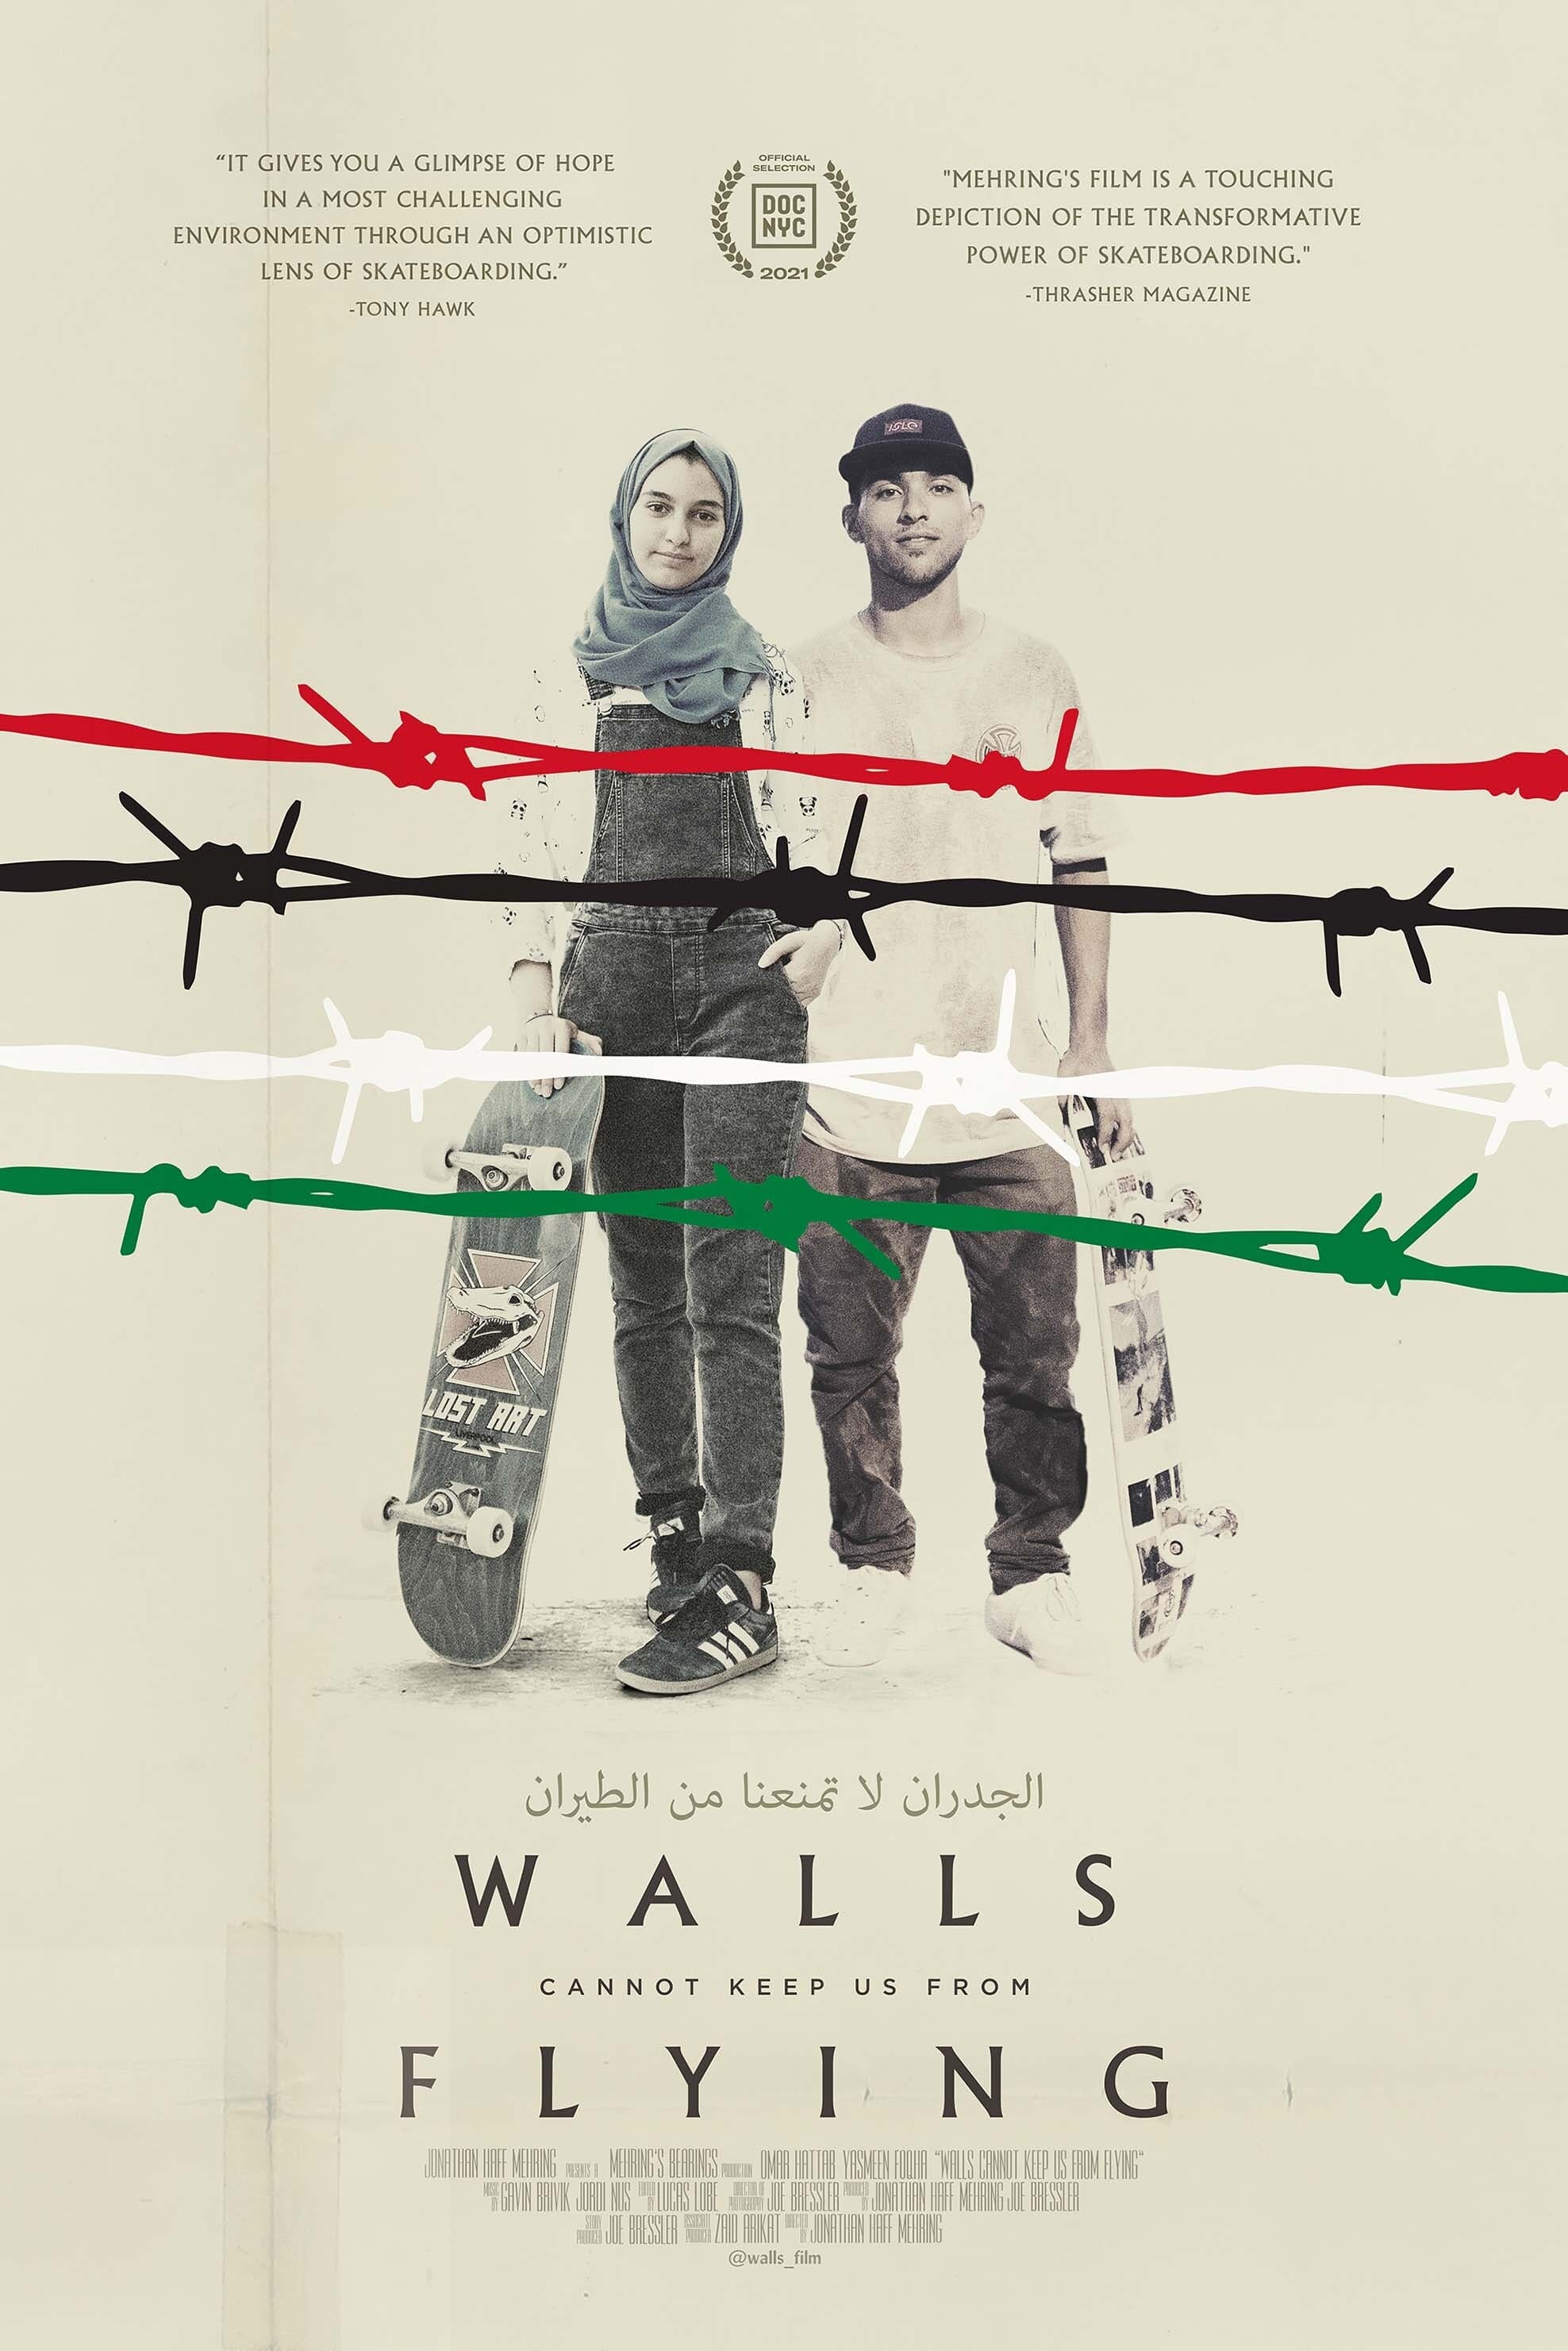 Walls Cannot Keep Us From Flying